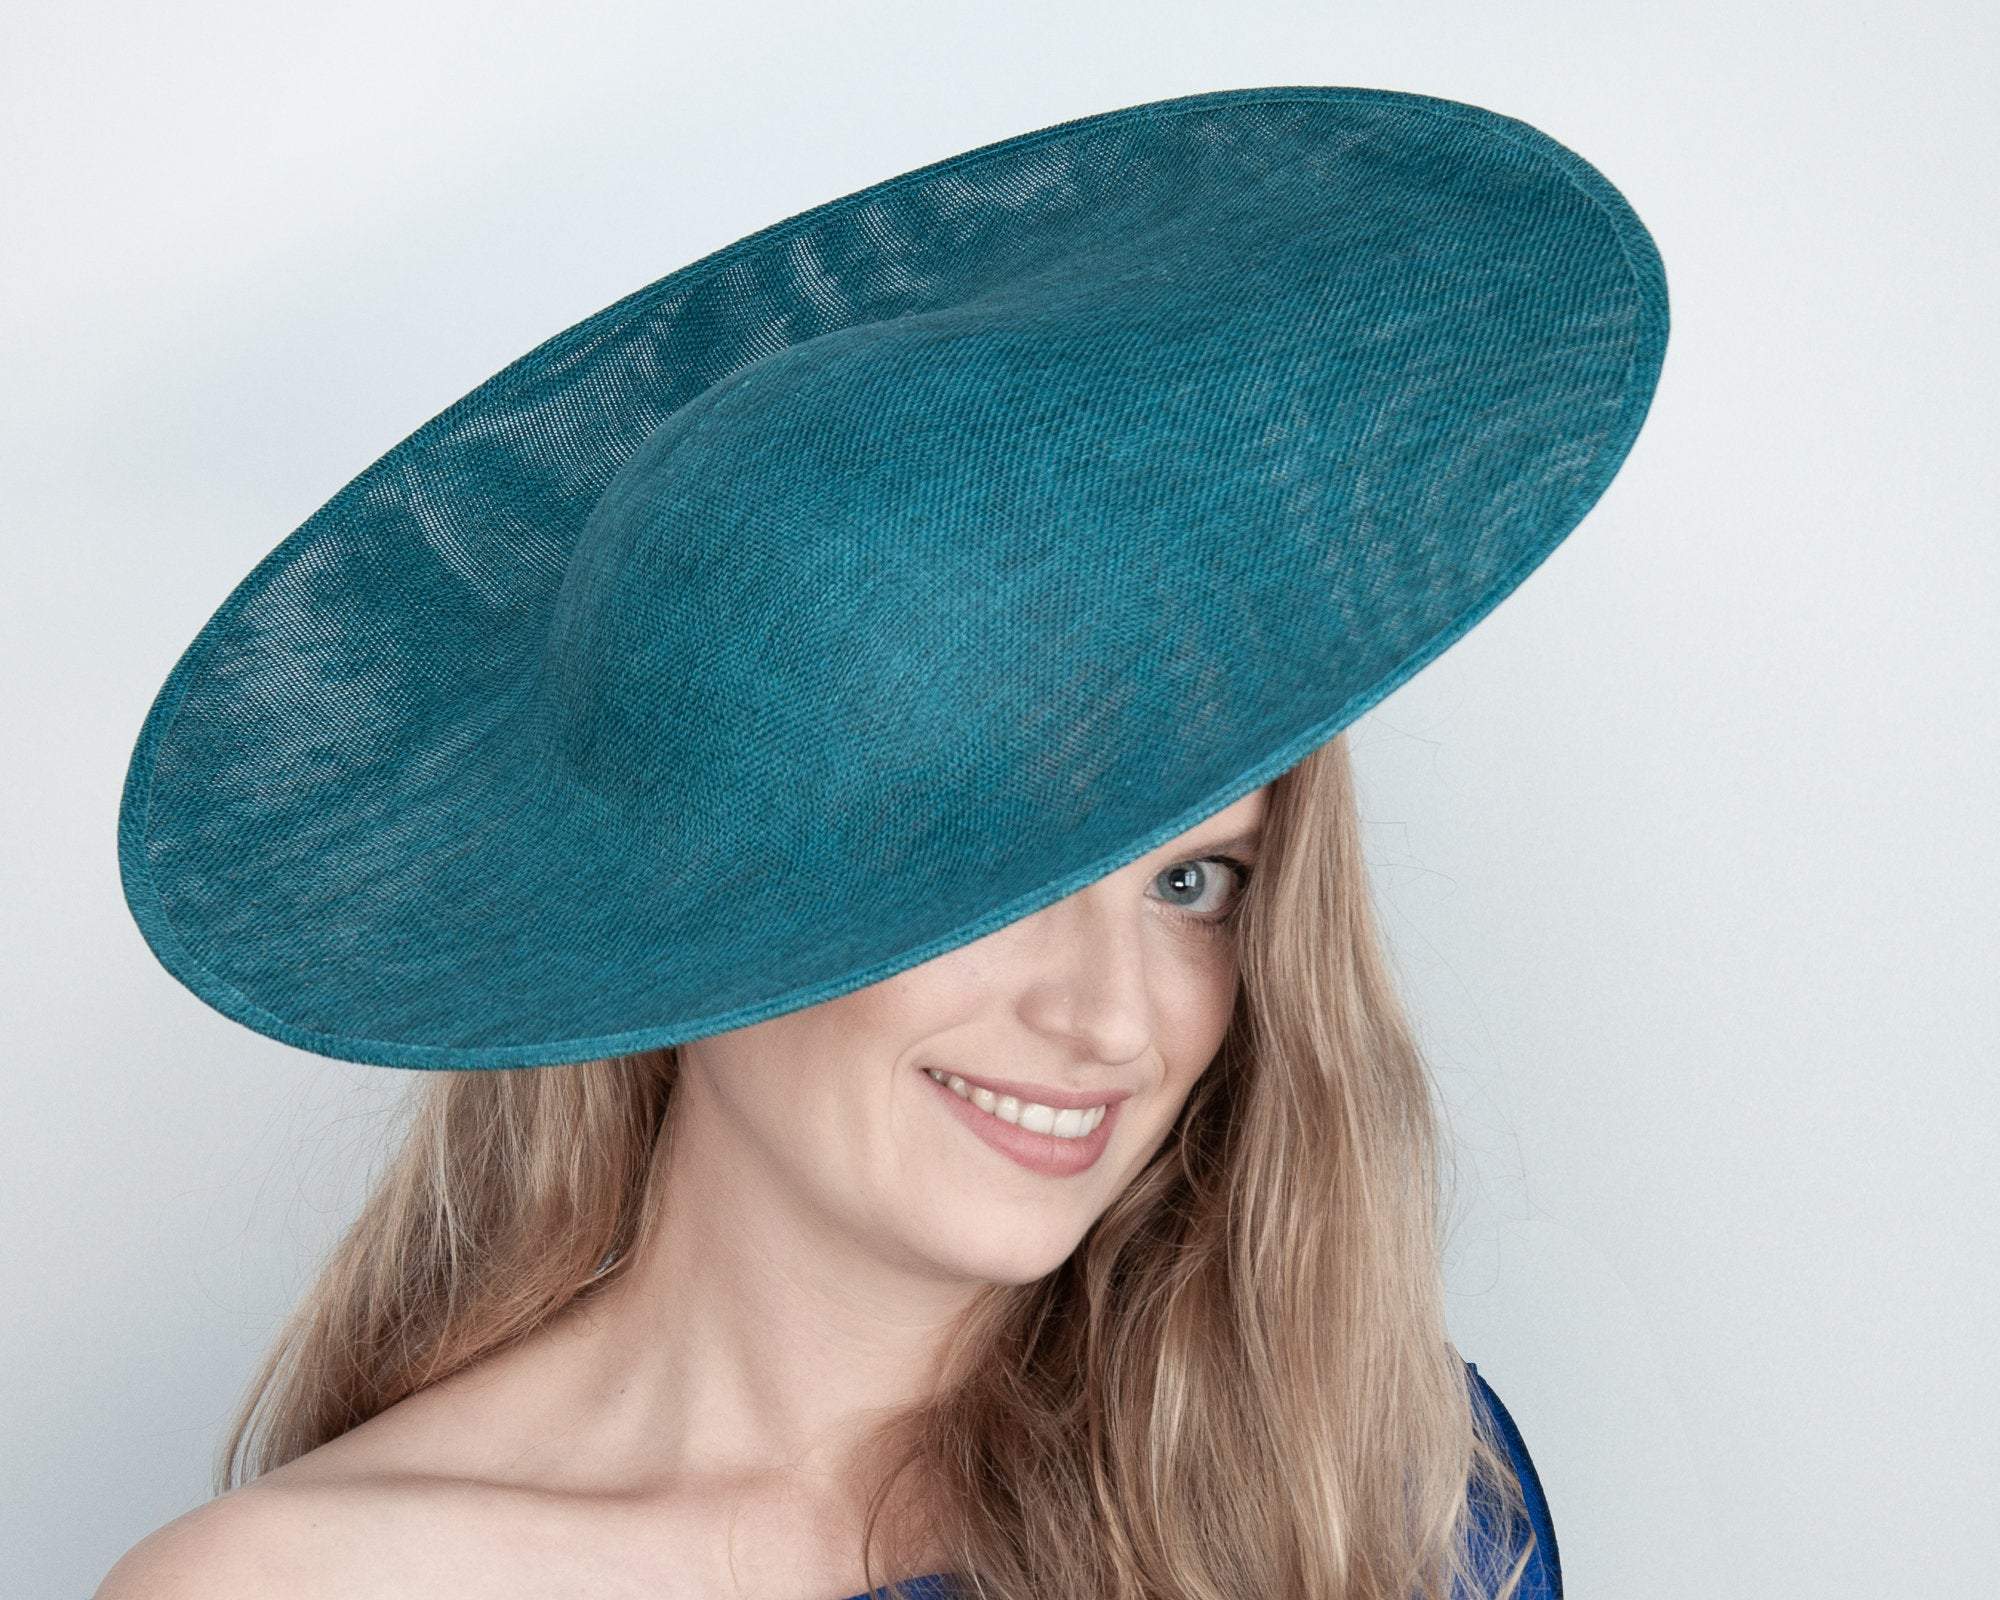 HALO HAT - ROYAL BLUE HEADDRESS FOR THE SUMMER IN 50s NEW LOOK AND CONTEMPORARY OUTFITS © Seegang Berlin